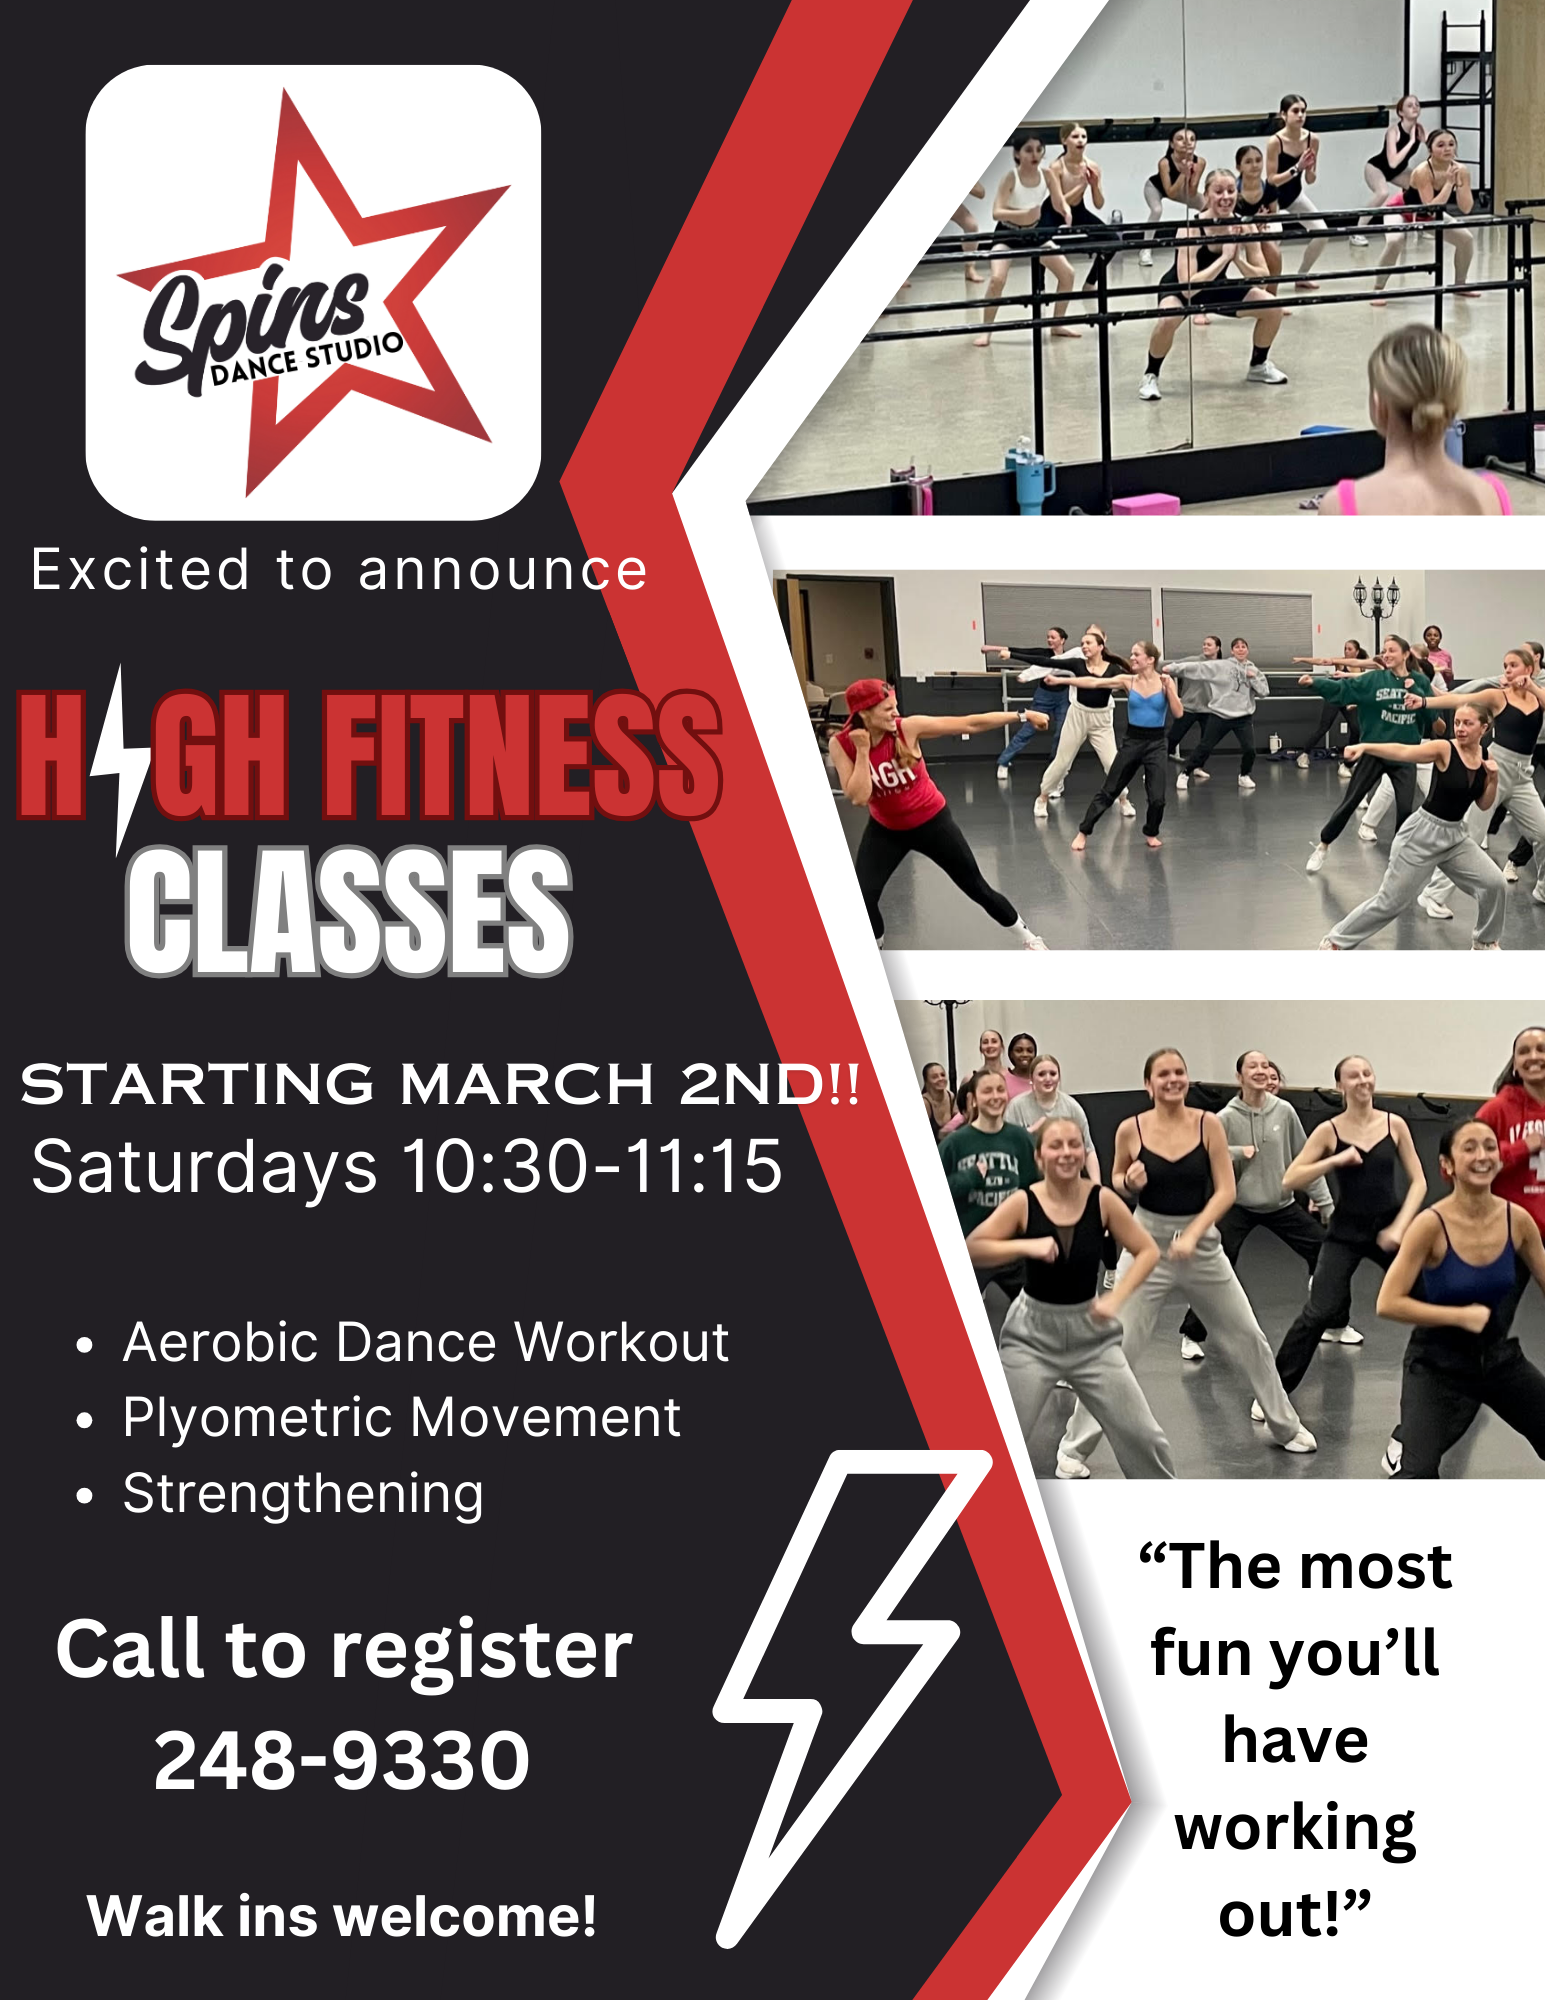 High Fitness Classes - Rochester, NY - Spins Dance Studio